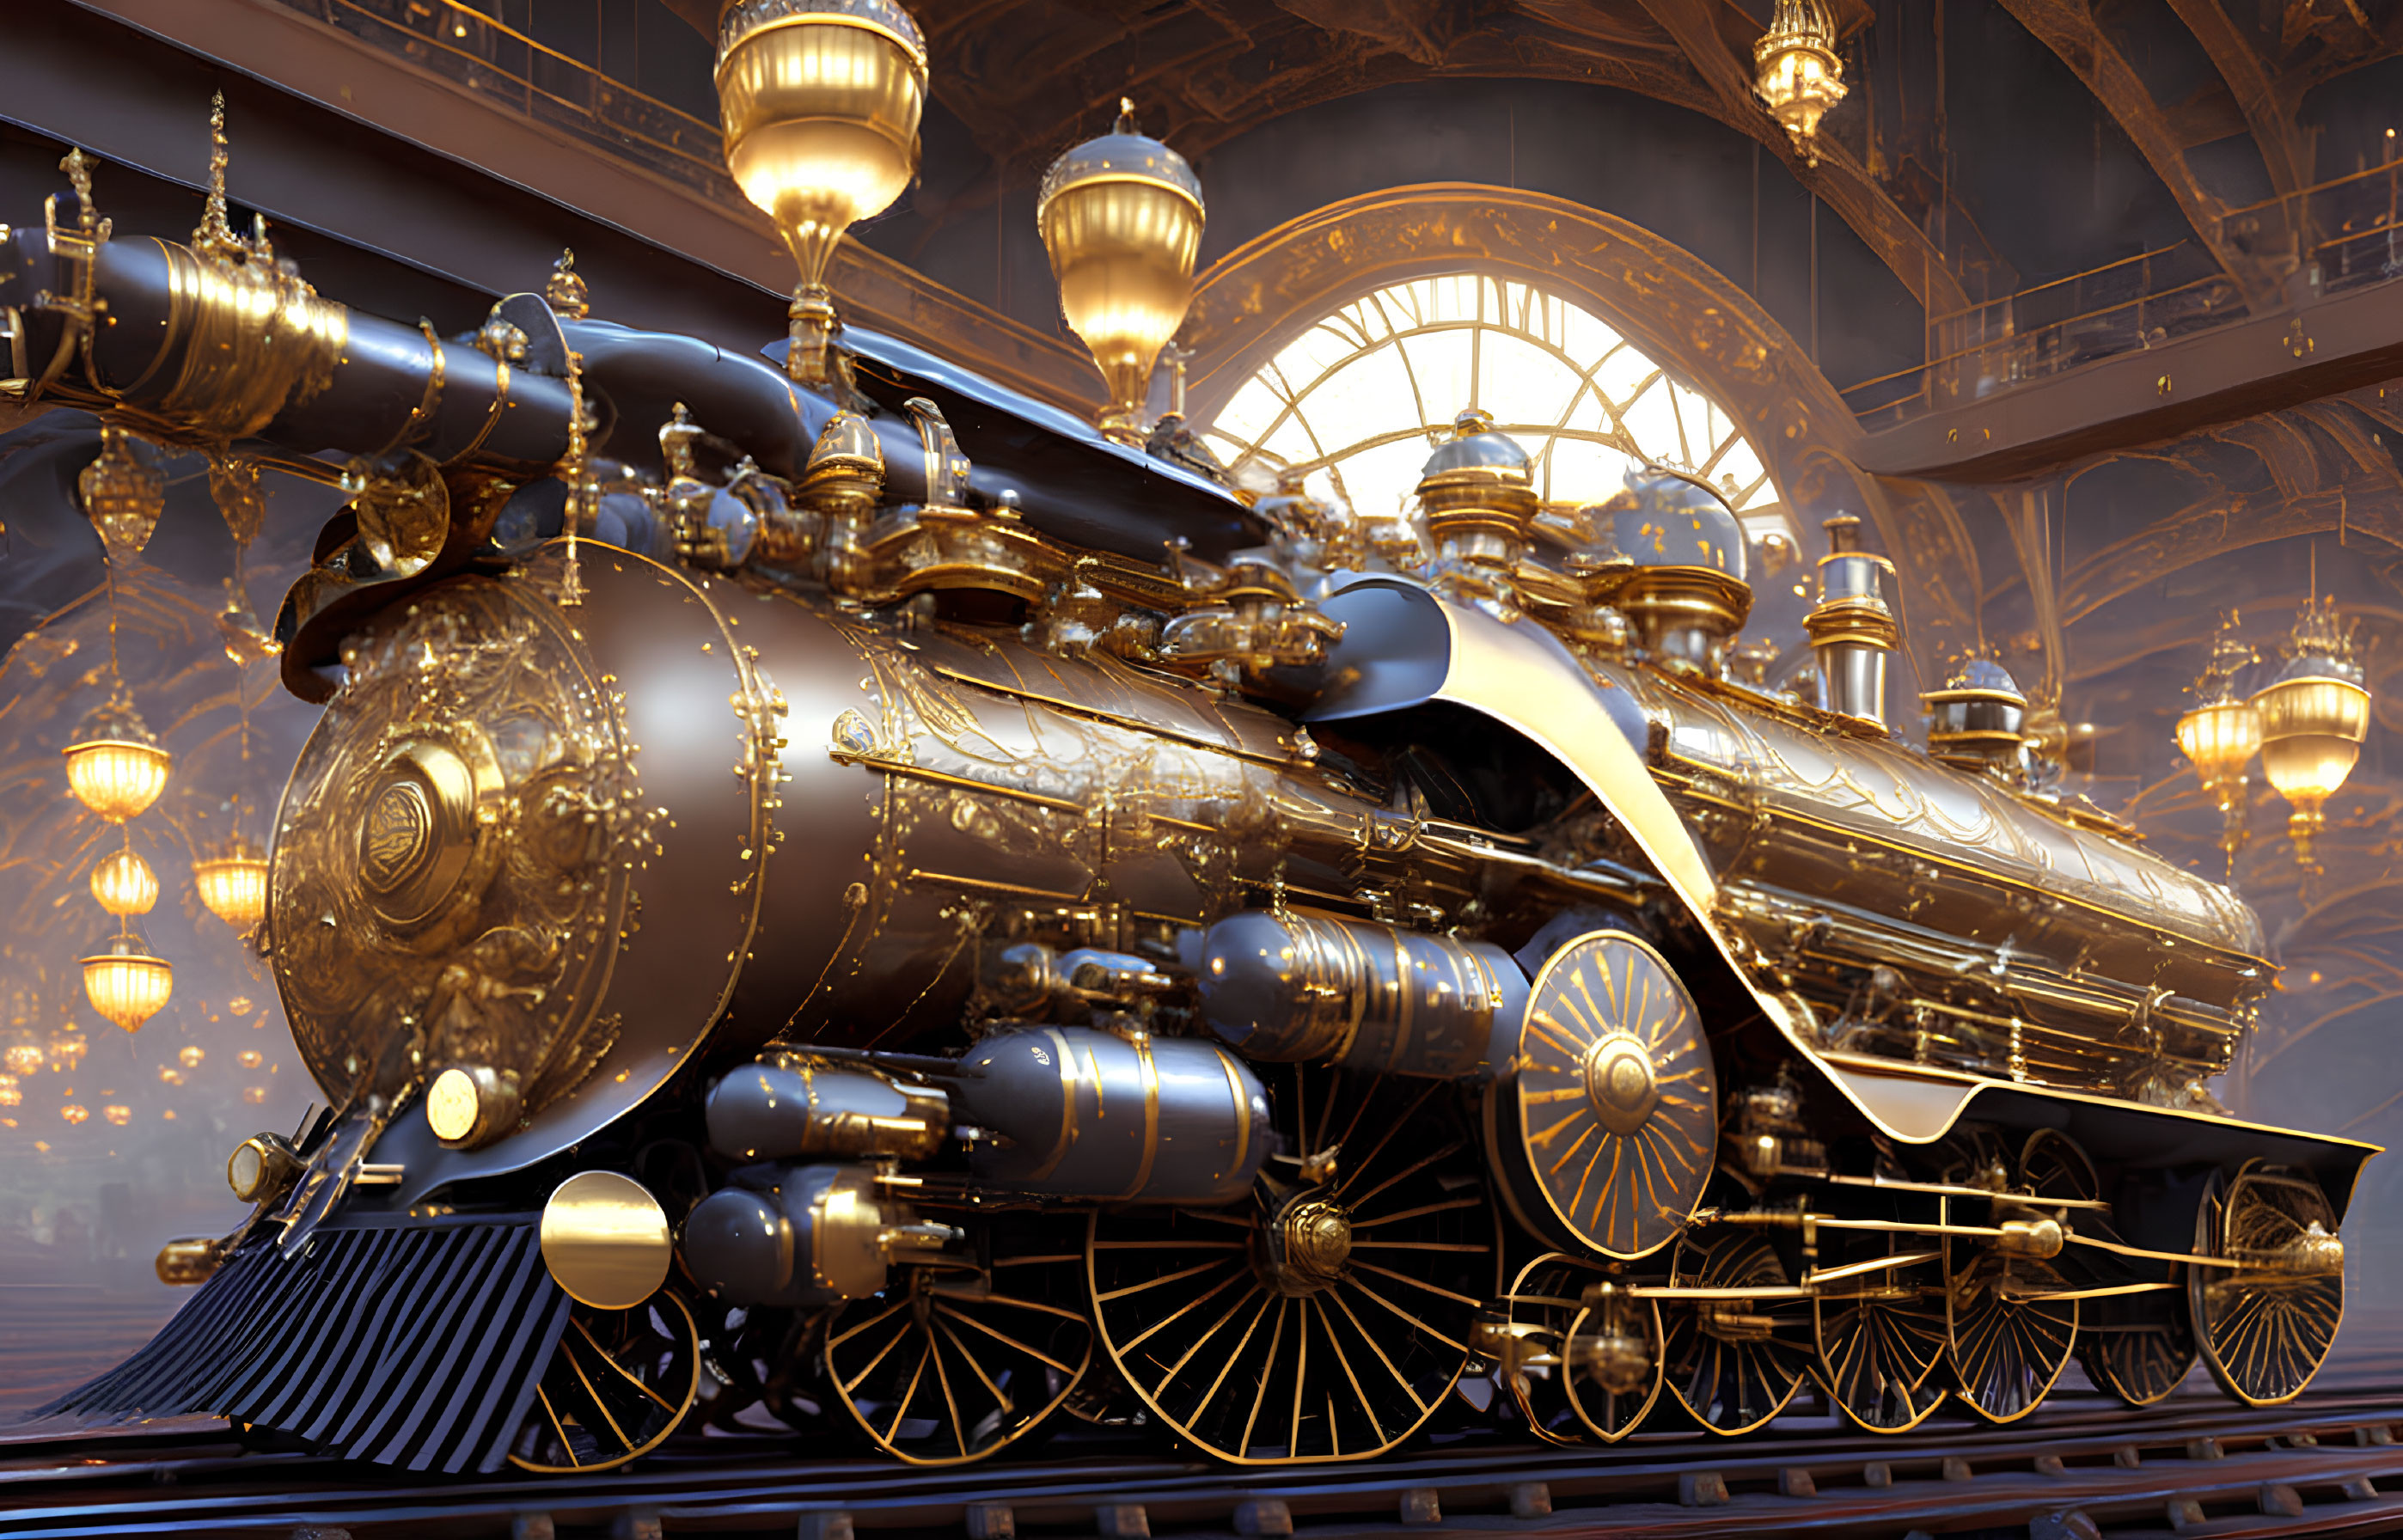 Ornate Steampunk Train Station with Vintage Gold-Detailed Train